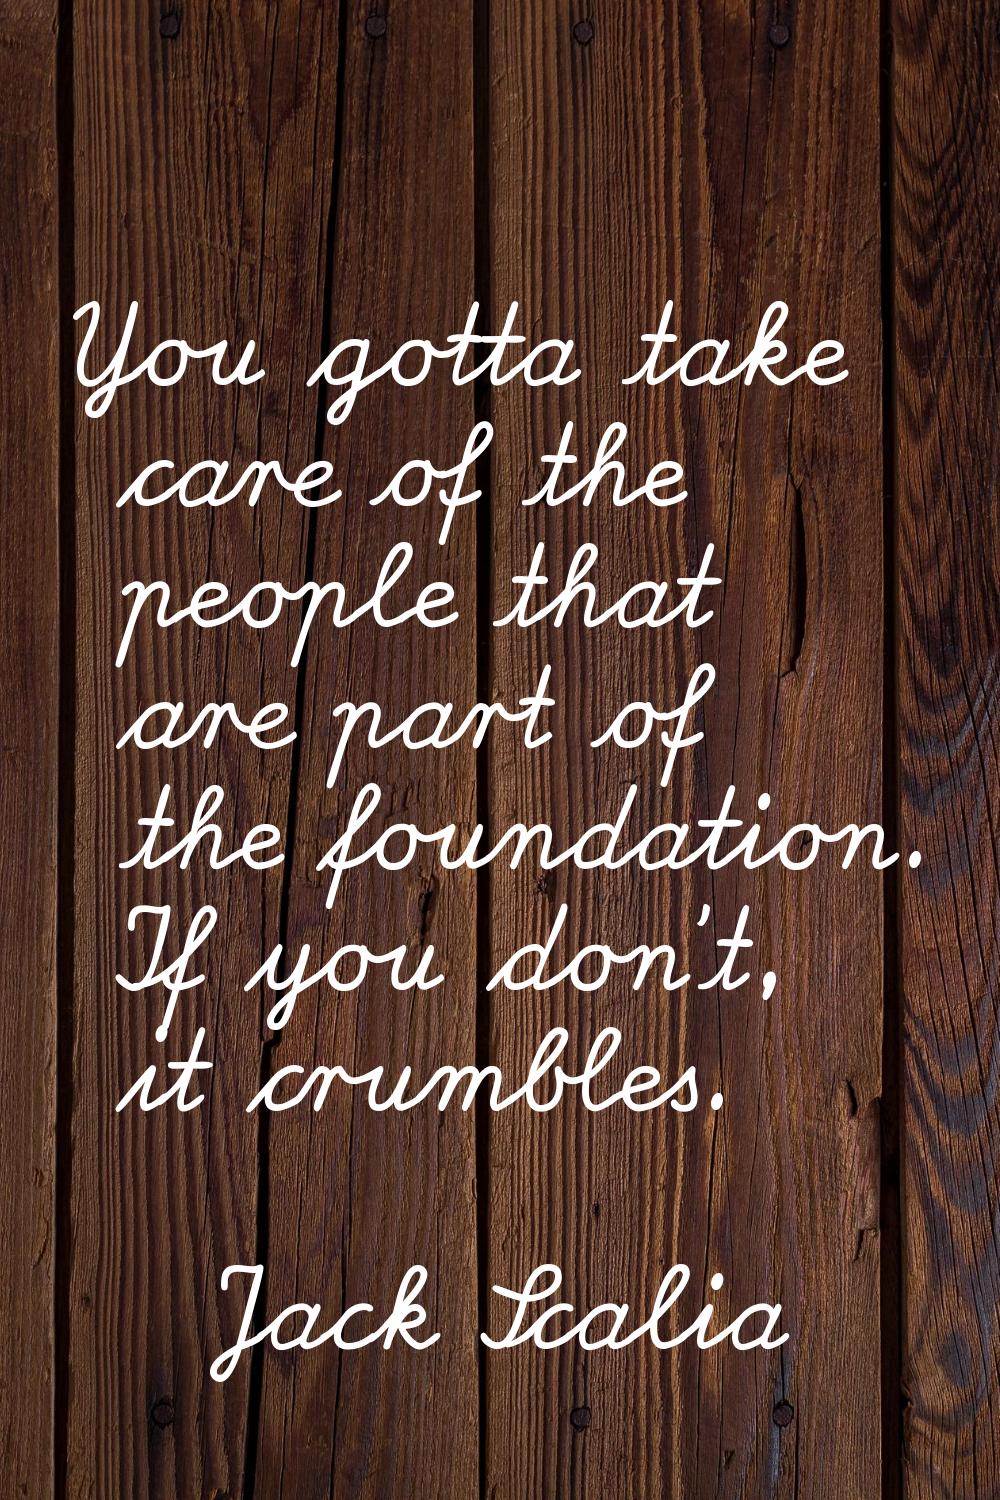 You gotta take care of the people that are part of the foundation. If you don't, it crumbles.